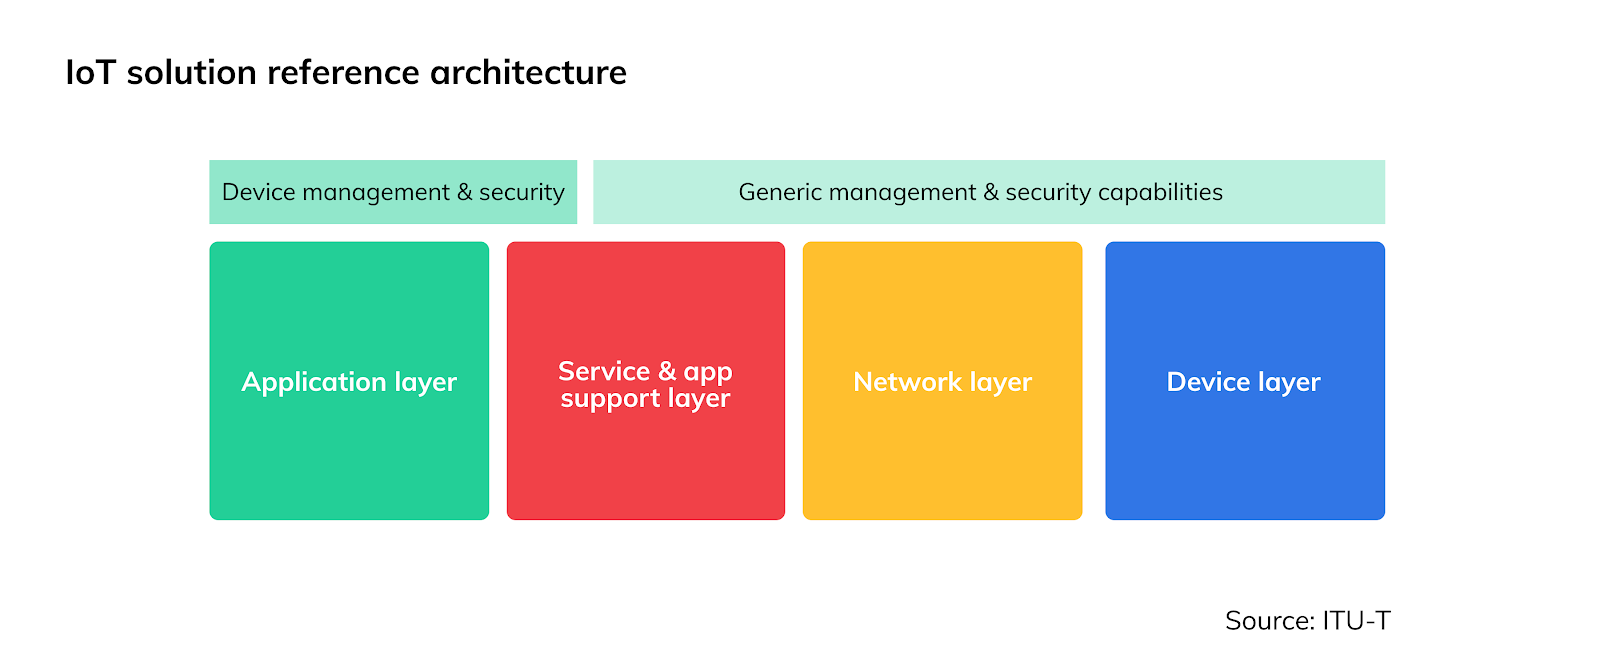 IoT reference architecture. Source: ITU-T